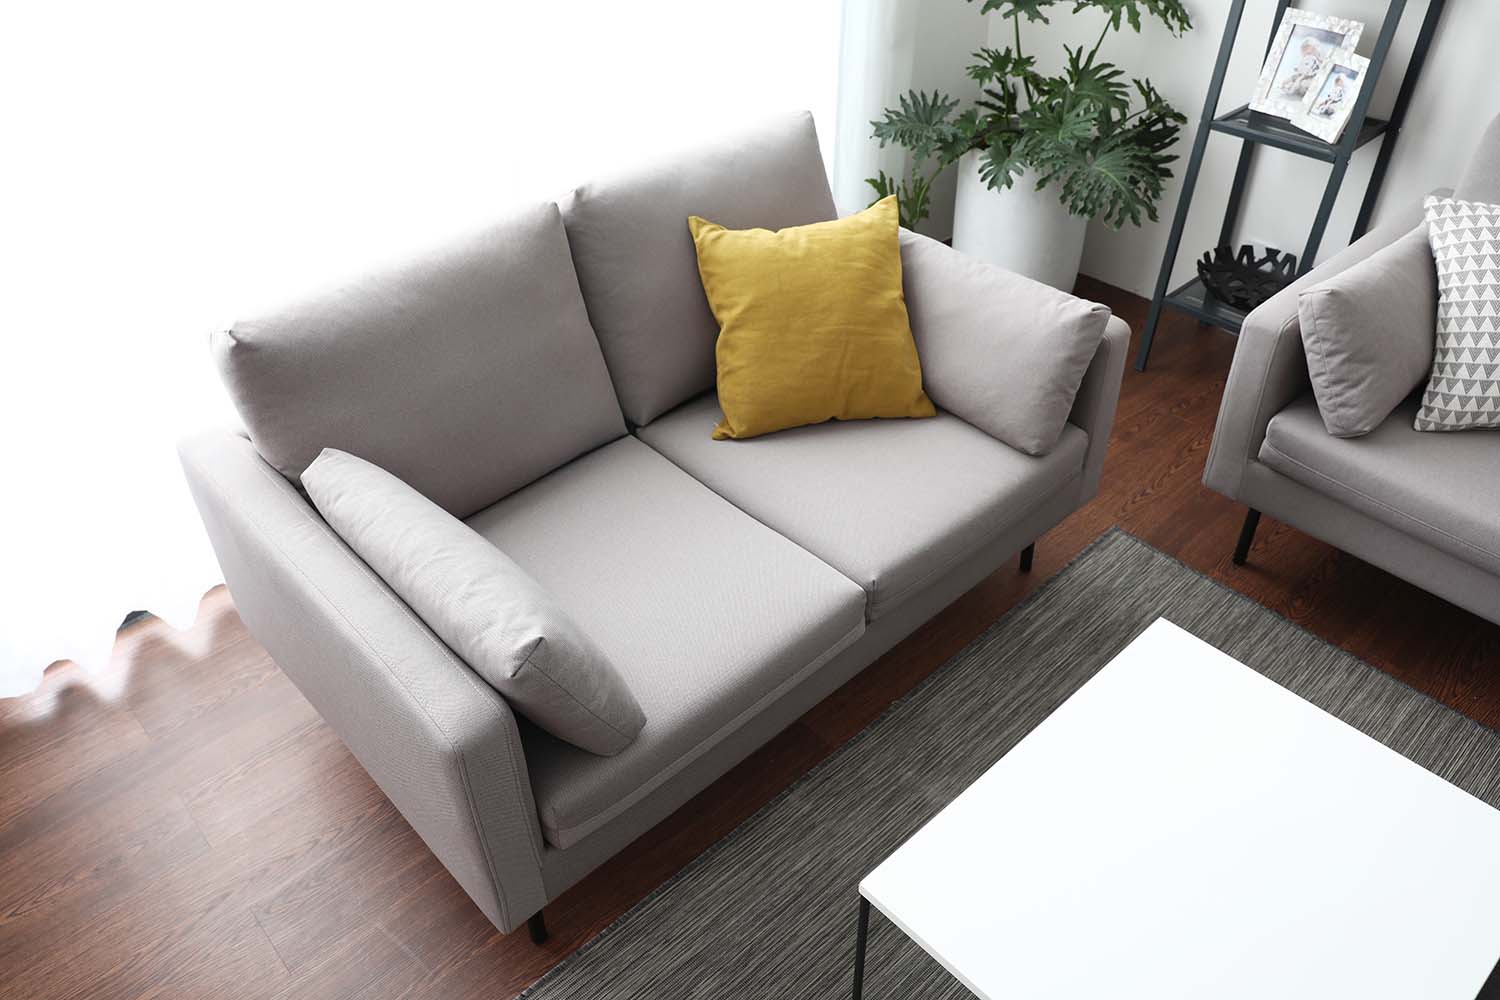 Side view of the Luna Sofa 2 seater sofa showcasing its ability to comfortably accommodate 2 seaters.